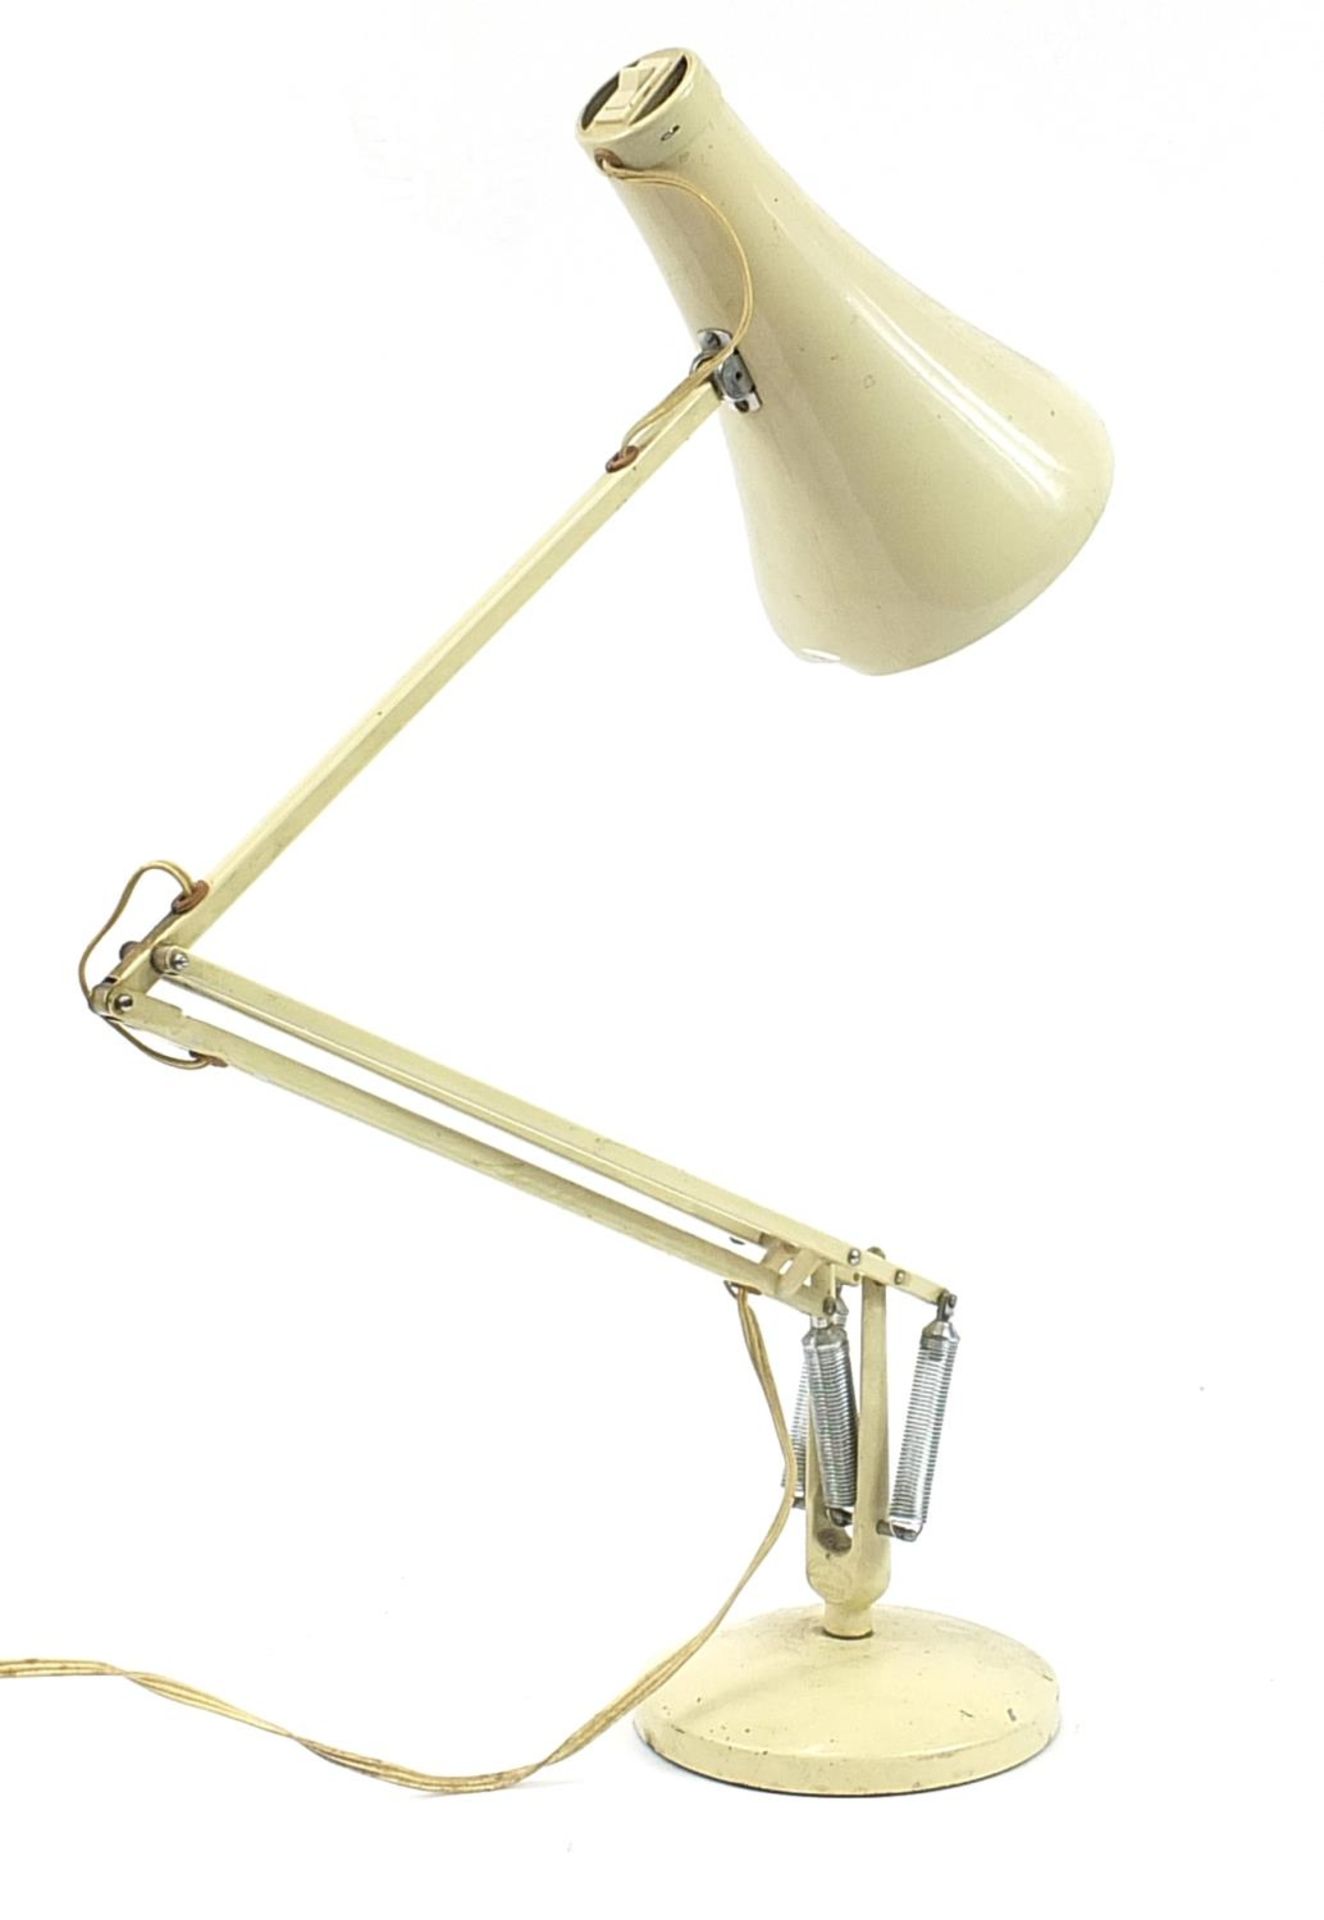 Vintage Herbert Terry Anglepoise lamp, 84cm high fully extended - Image 2 of 3